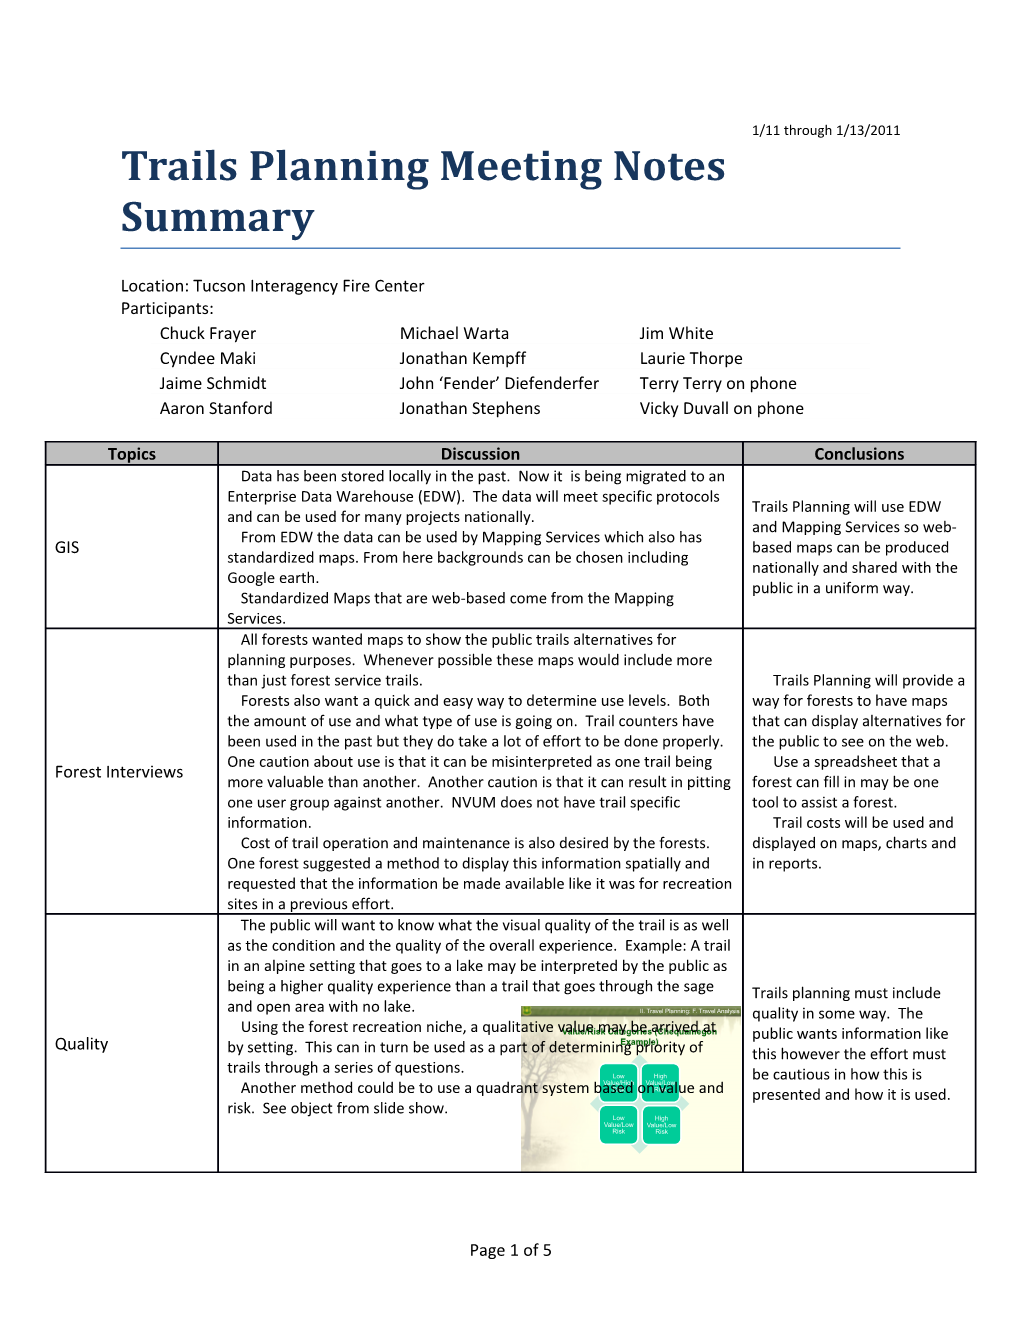 Trails Planning Meeting Notes Summary